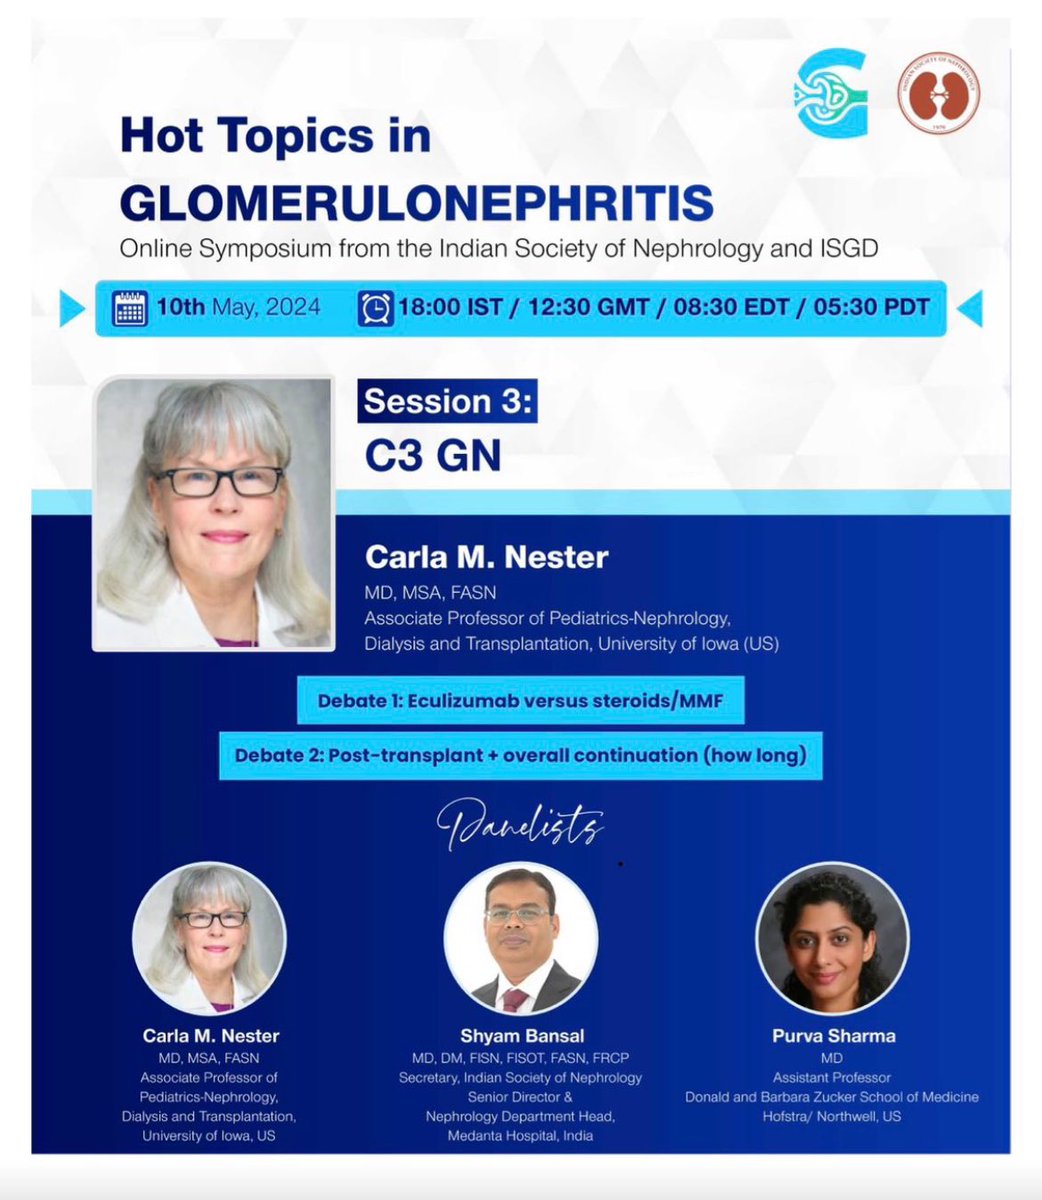 Hot Topics in Glomerulnephritis. An online symposium organized by the @isn_india and @ISGDtweets. 10th May 2024, 6.00PM IST Session 3: C3 GN Register here 👉 is-gd.org/hot-topics-in-…